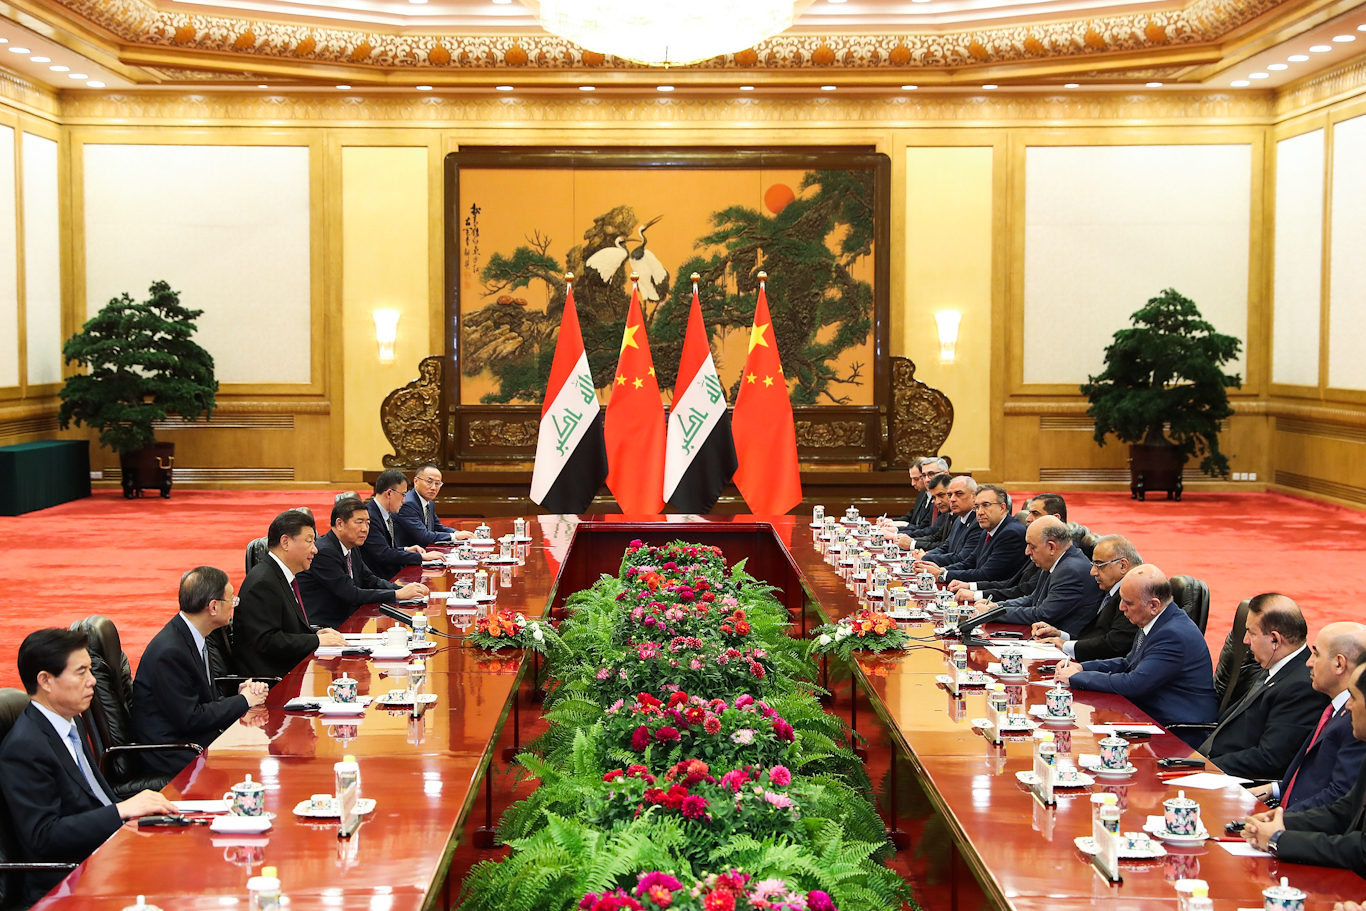 Chinese President Xi Jinping, center left, meet with Iraqi Prime Minister Adil Abdul-Mahdi, center right, in Beijing, Sept. 23, 2019. Lintao Zhang | AP